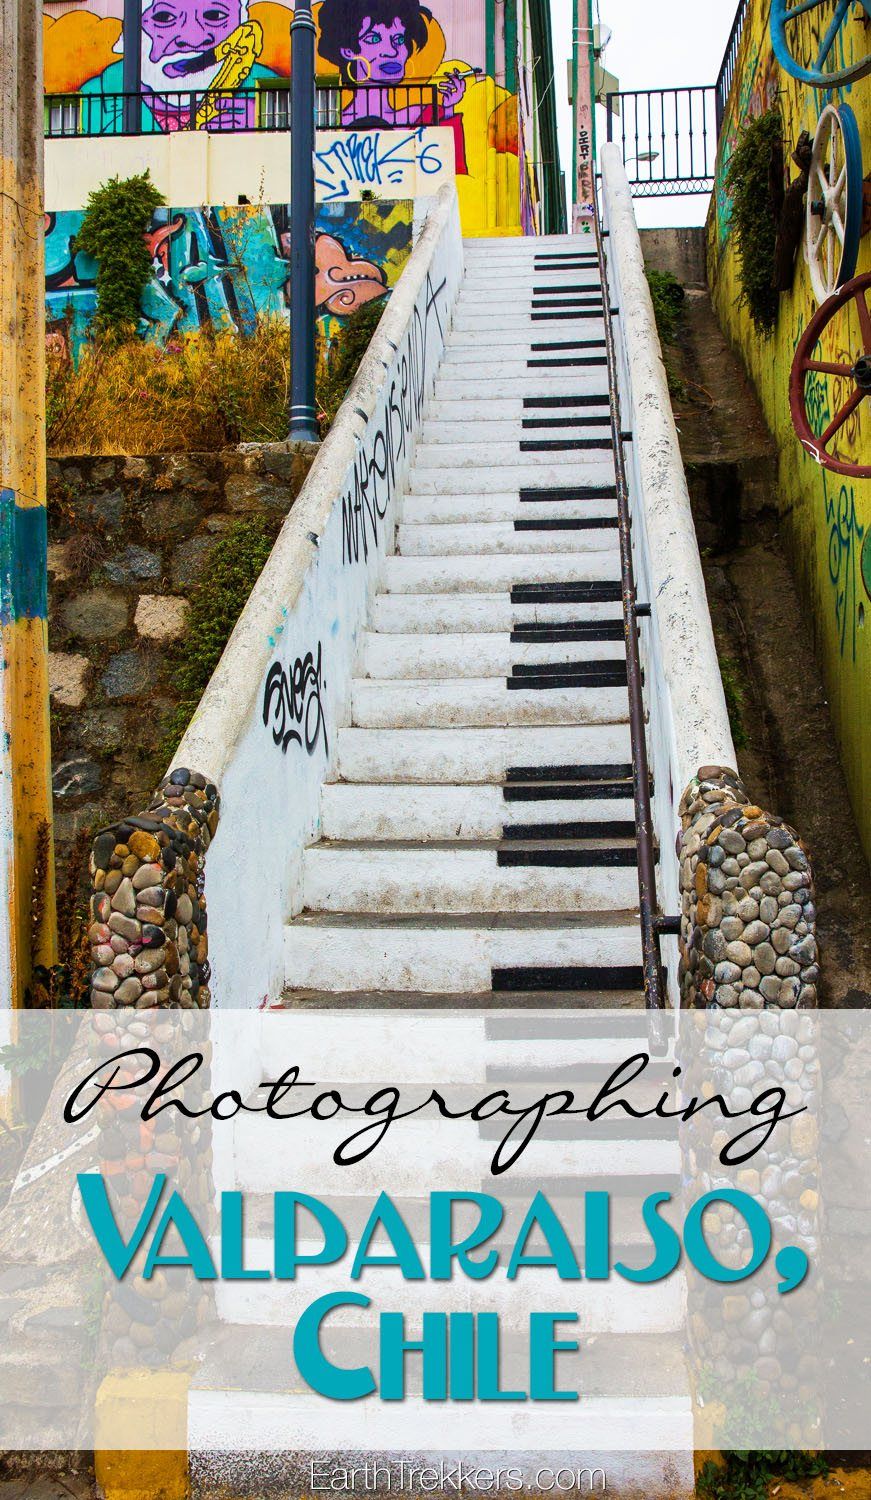 Photographing Valparaiso Chile 